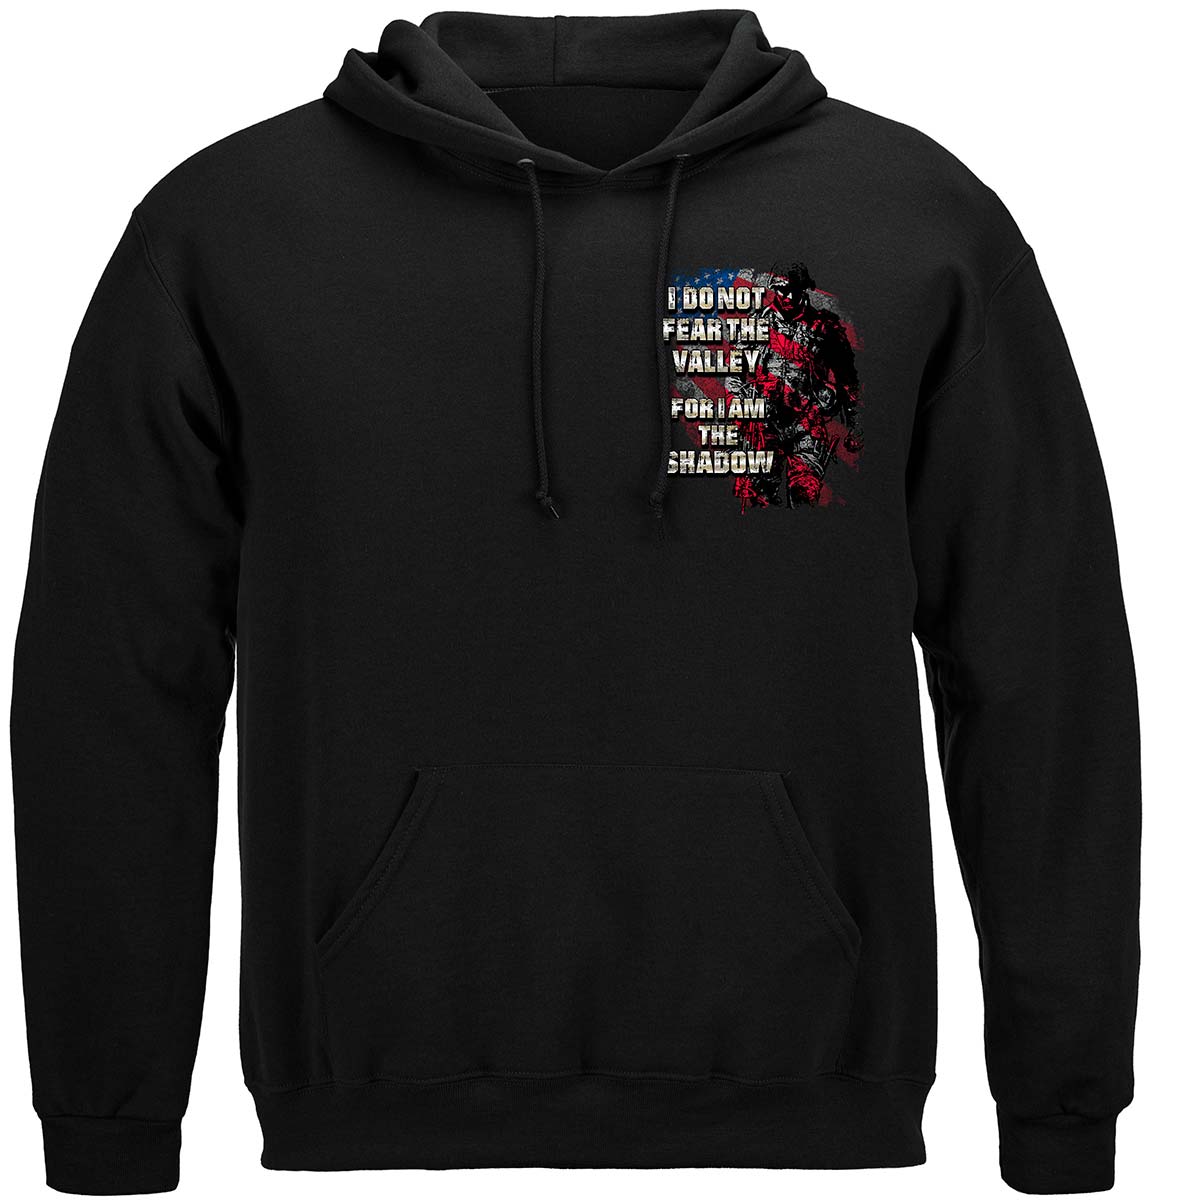 American Flag Soldier I Am The Shadow Premium Hooded Sweat Shirt